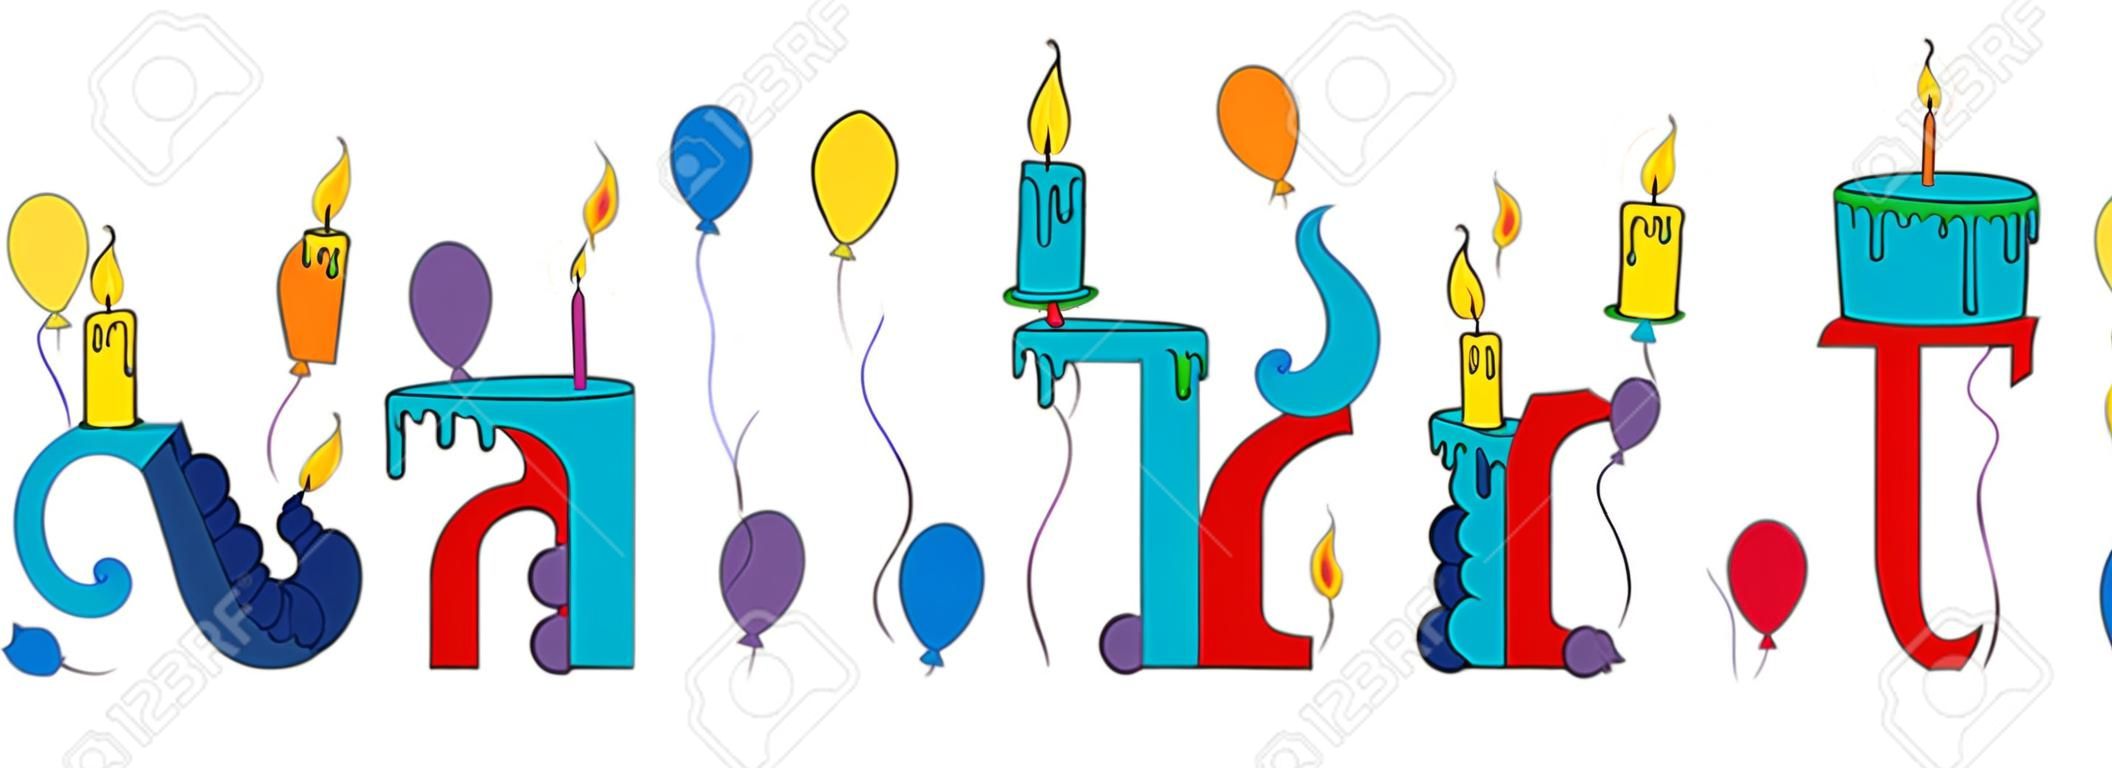 Matias name with colorful 3d lettering birthday cake with candles and balloons.